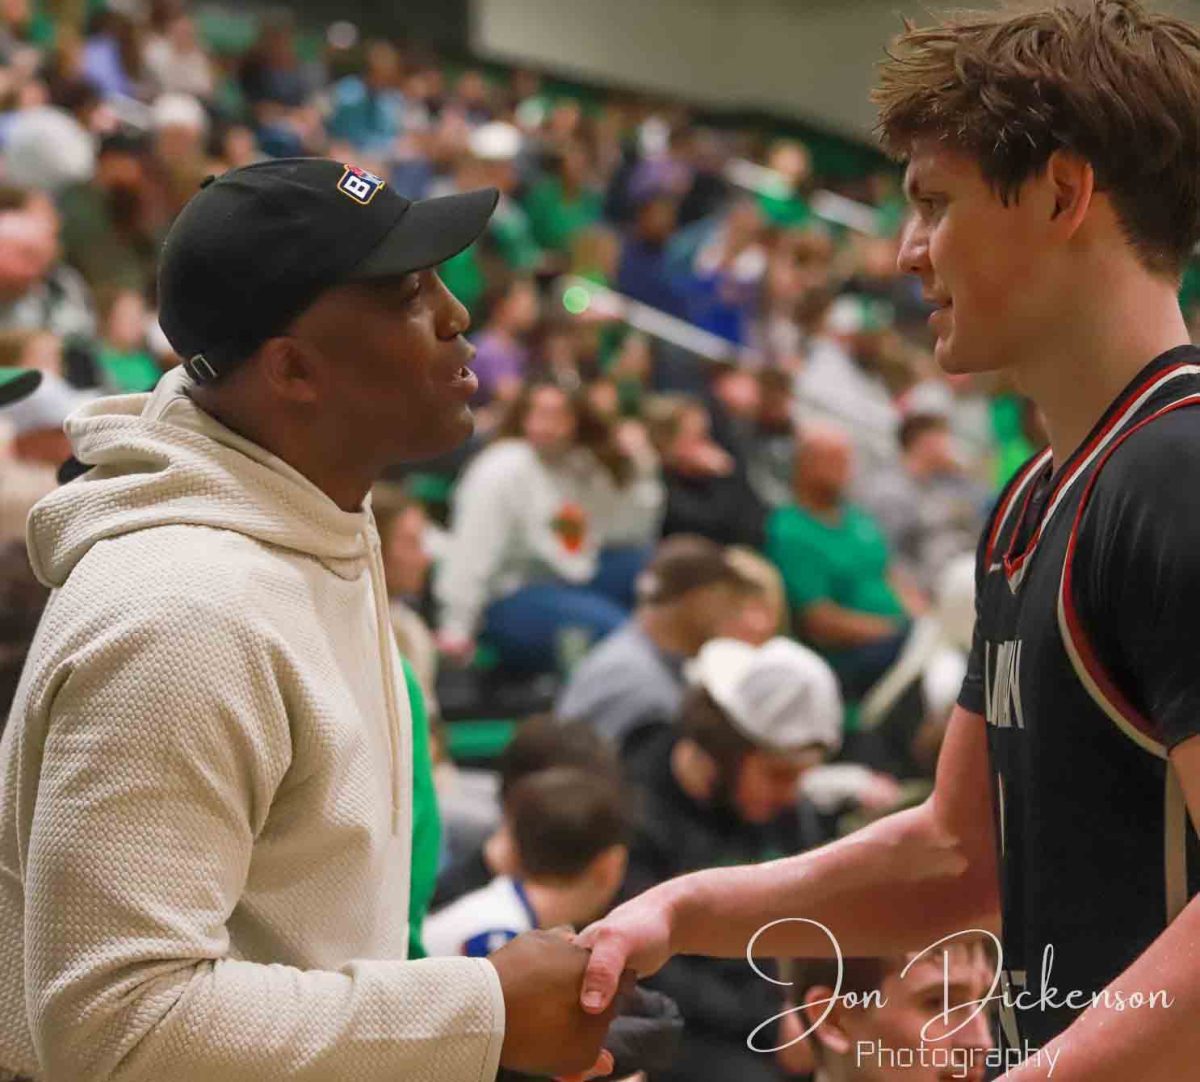 Former Harlan all-state guard Charles Thomas greeted Harlan County all-state guard Trent Noah in a game at Harlan earlier this month. Noah broke Thomas county scoring record on Saturday against Boyd County with 38 points. He now has 3,375 points in his prep career.